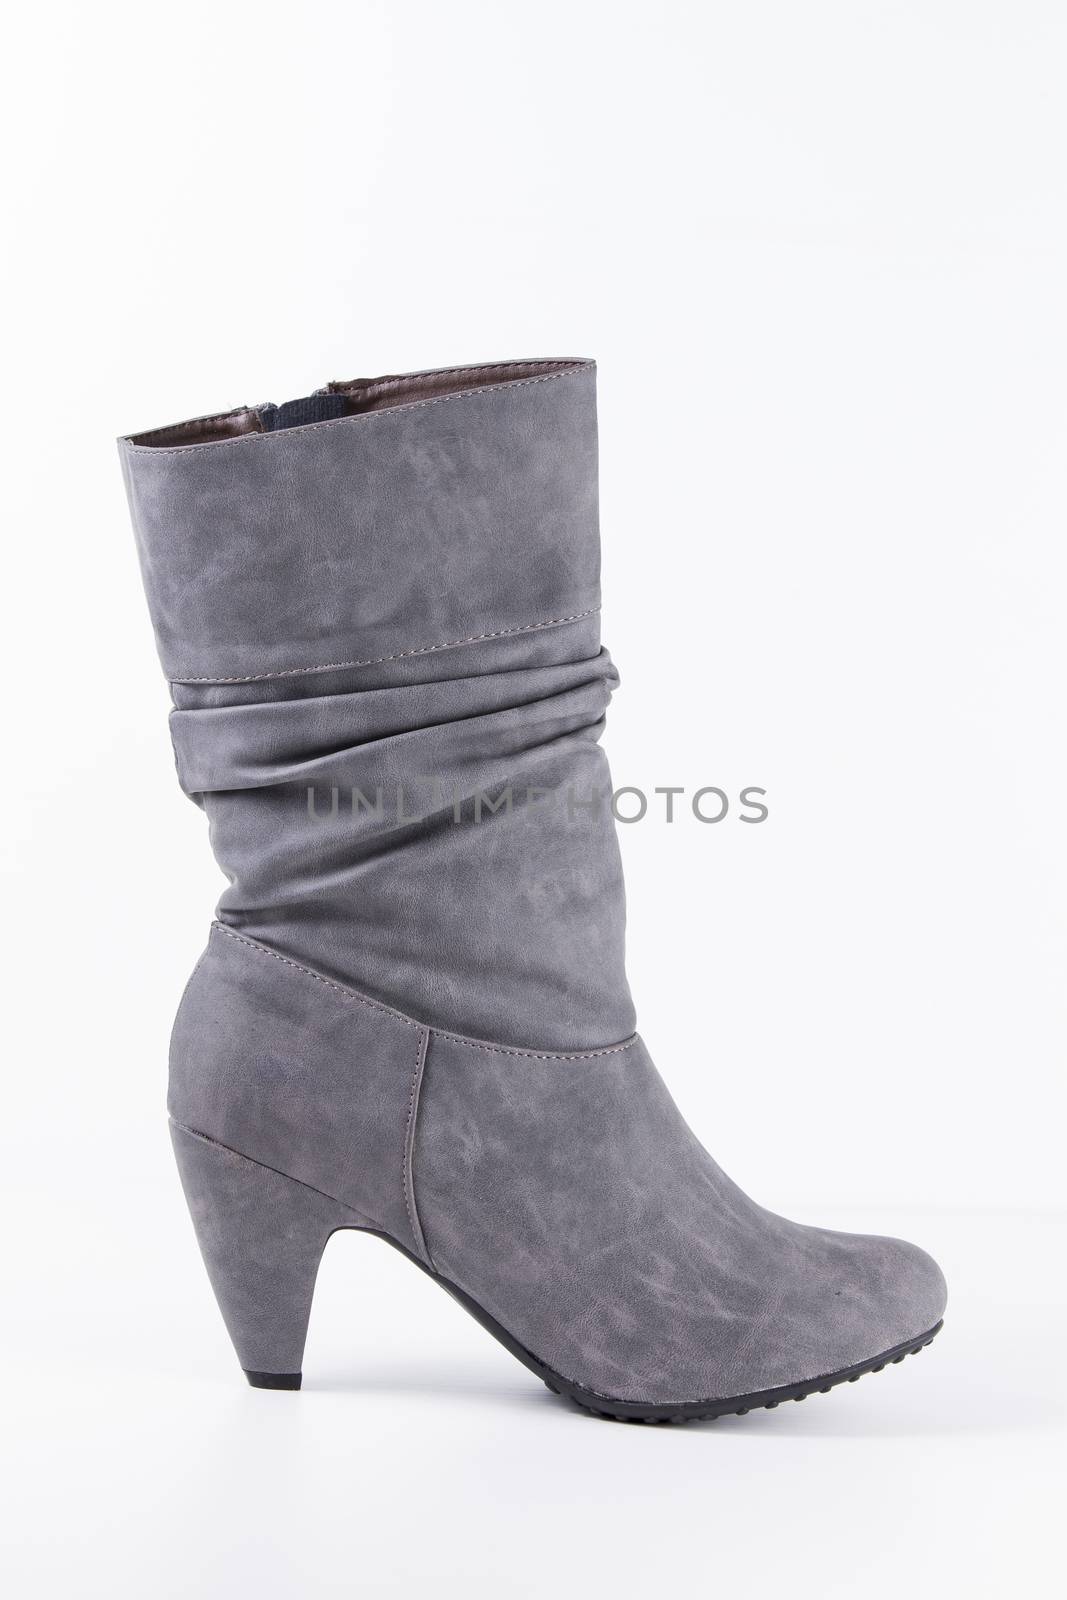 Grey leather boots on white background, isolated product. by GeorgeVieiraSilva